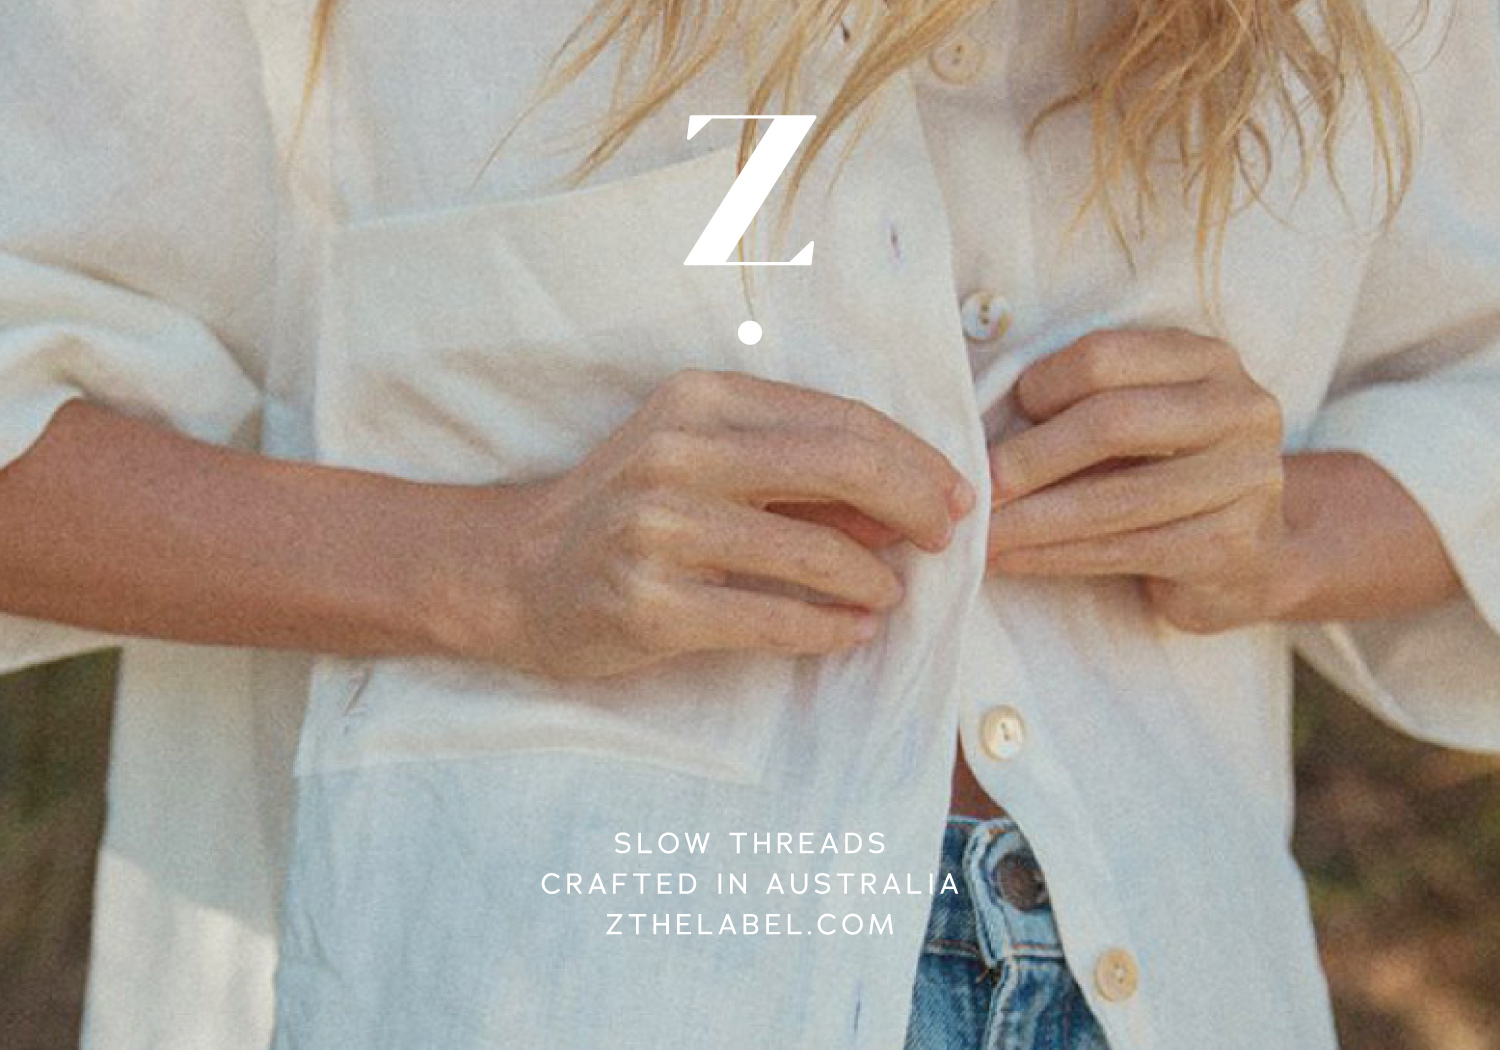 Photo background of woman wearing Z the label white tshirt. Image overlaid with Z the Label logo and tagline which reads 'Slow Threads. Crafted in Australia.